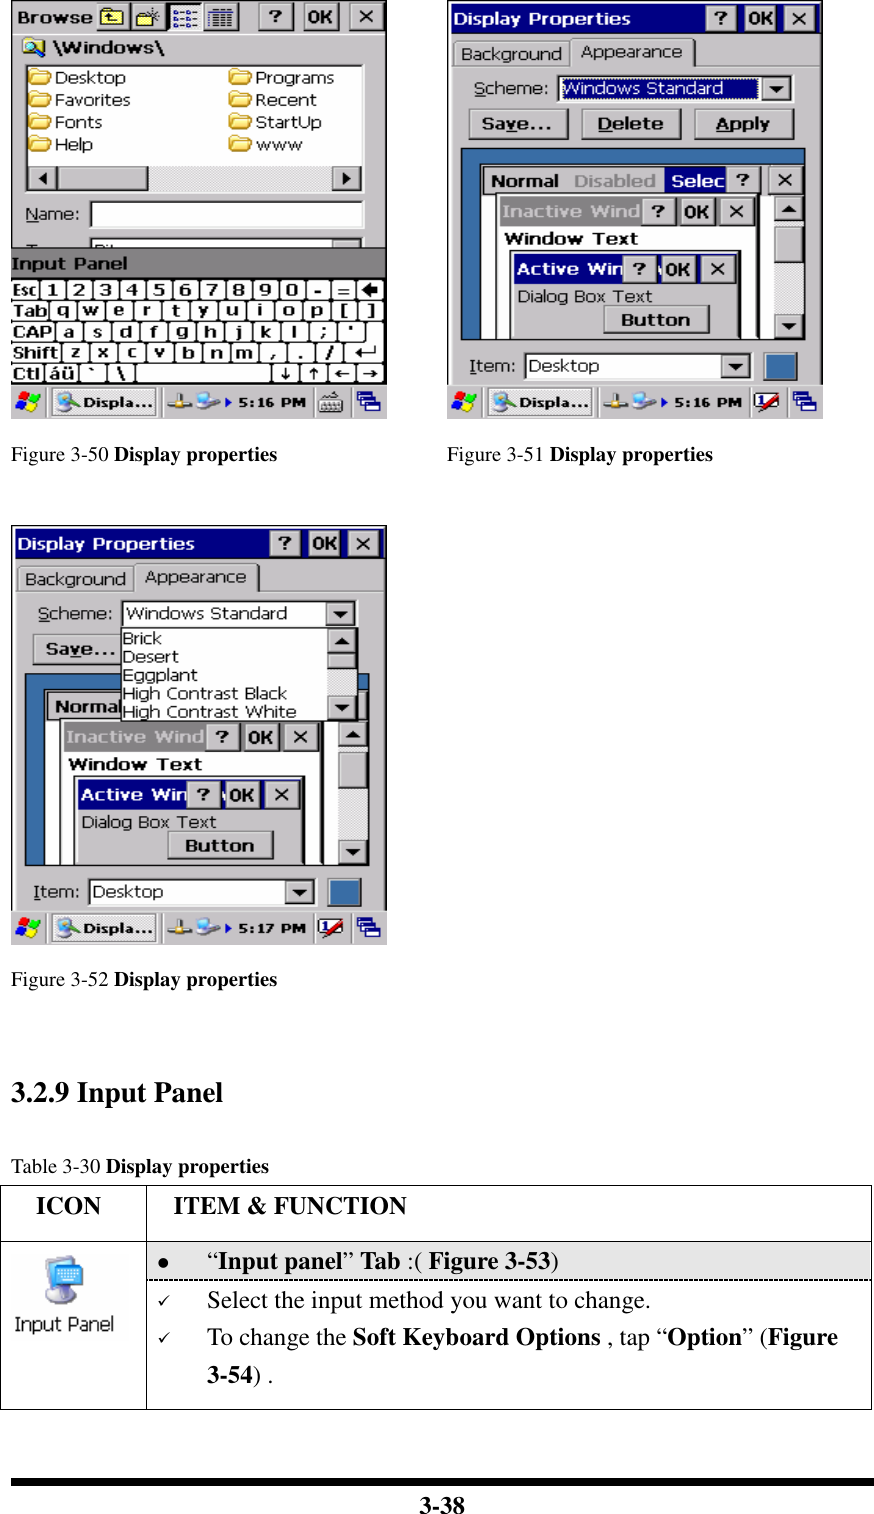  3-38    Figure 3-50 Display properties  Figure 3-51 Display properties      Figure 3-52 Display properties    3.2.9 Input Panel  Table 3-30 Display properties     ICON  ITEM &amp; FUNCTION  “Input panel” Tab :( Figure 3-53)    Select the input method you want to change.  To change the Soft Keyboard Options , tap “Option” (Figure 3-54) . 